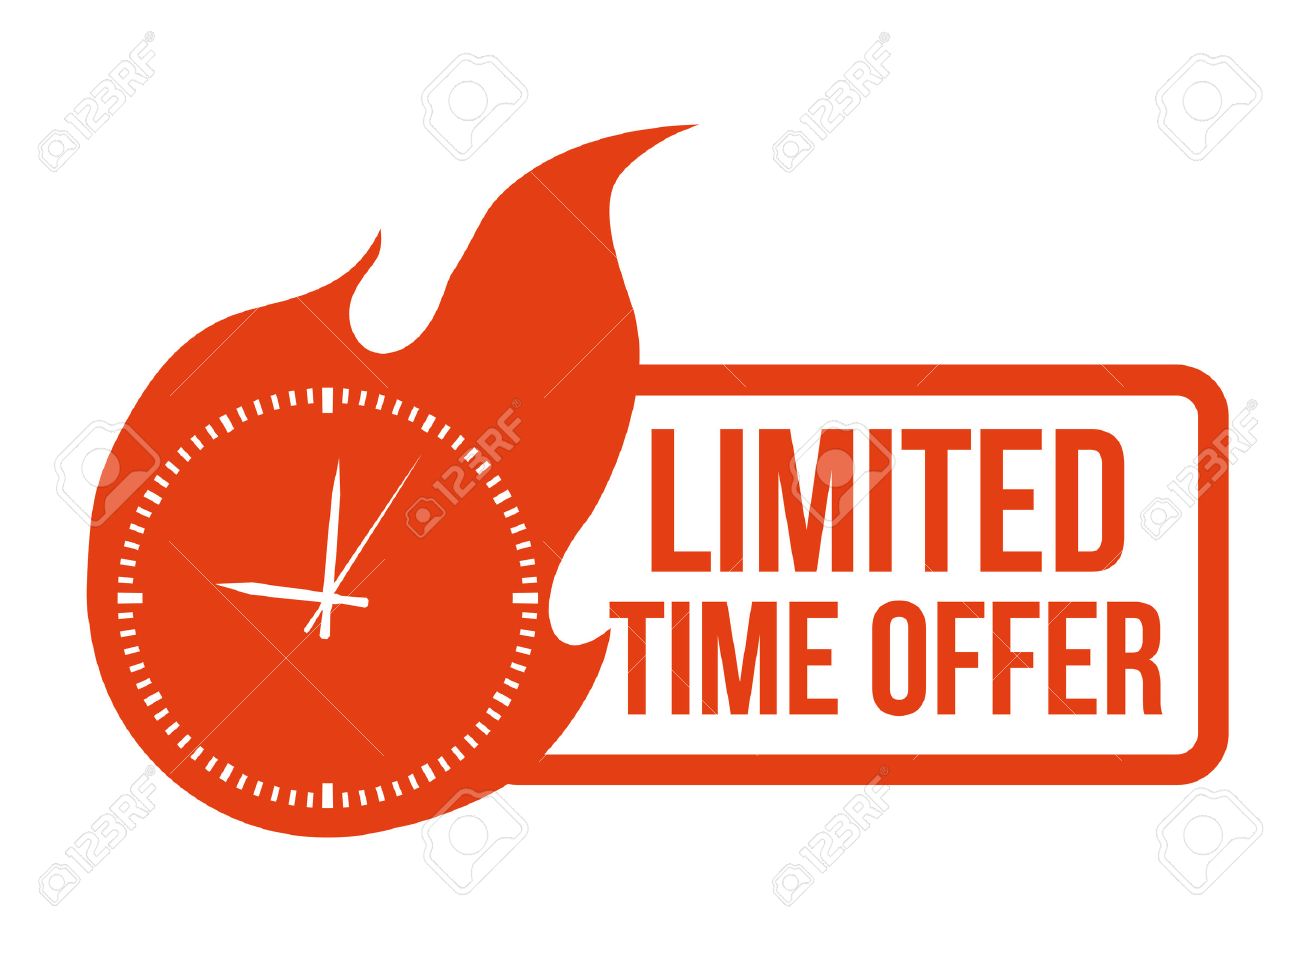 Limited Offer Clipart vector